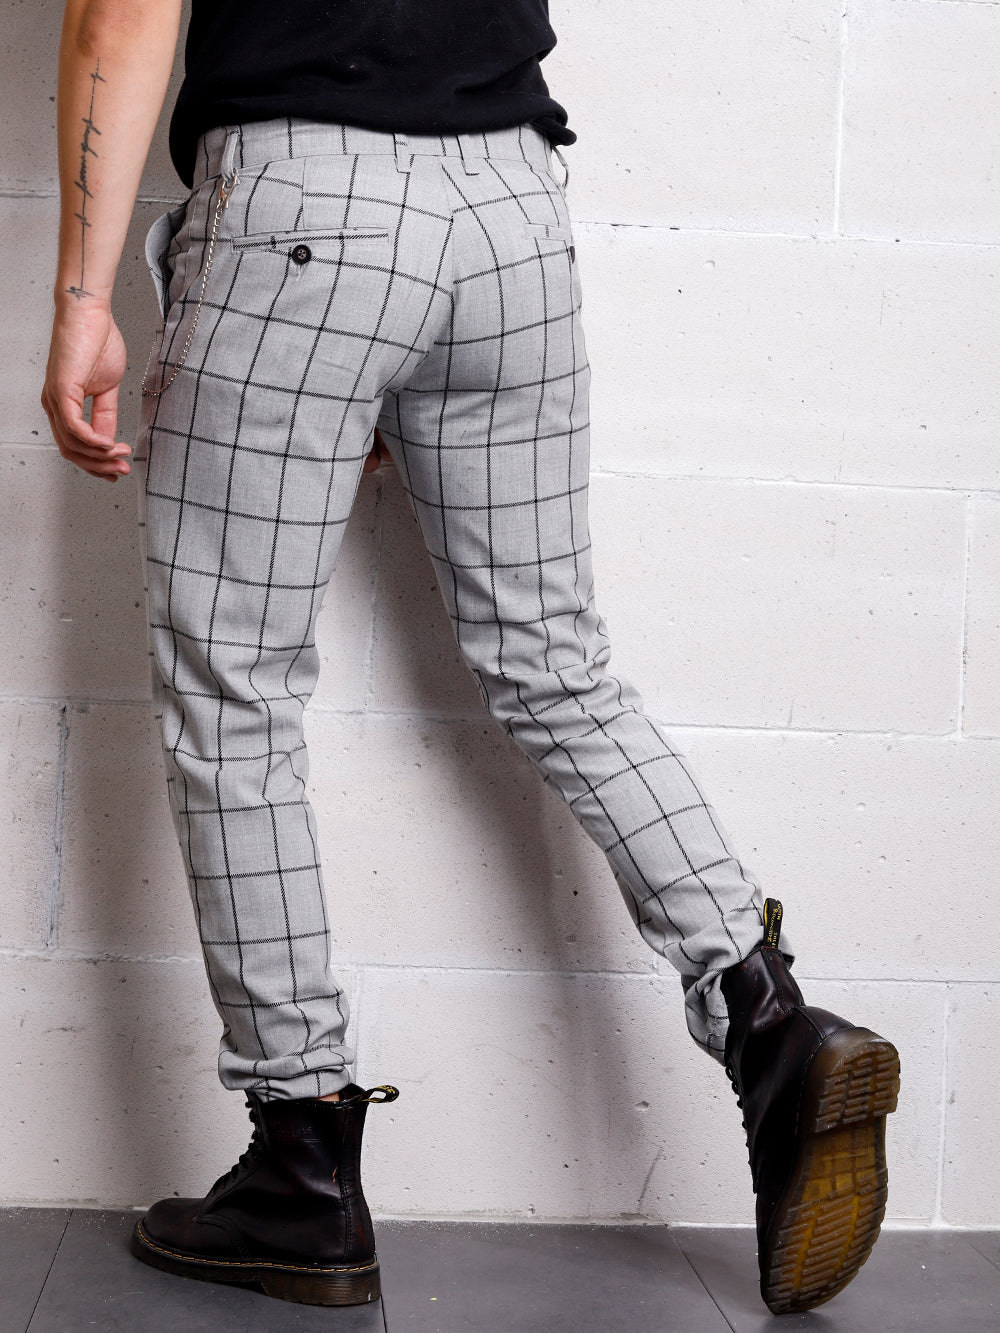 A man is leaning against a wall wearing Graystone pants.